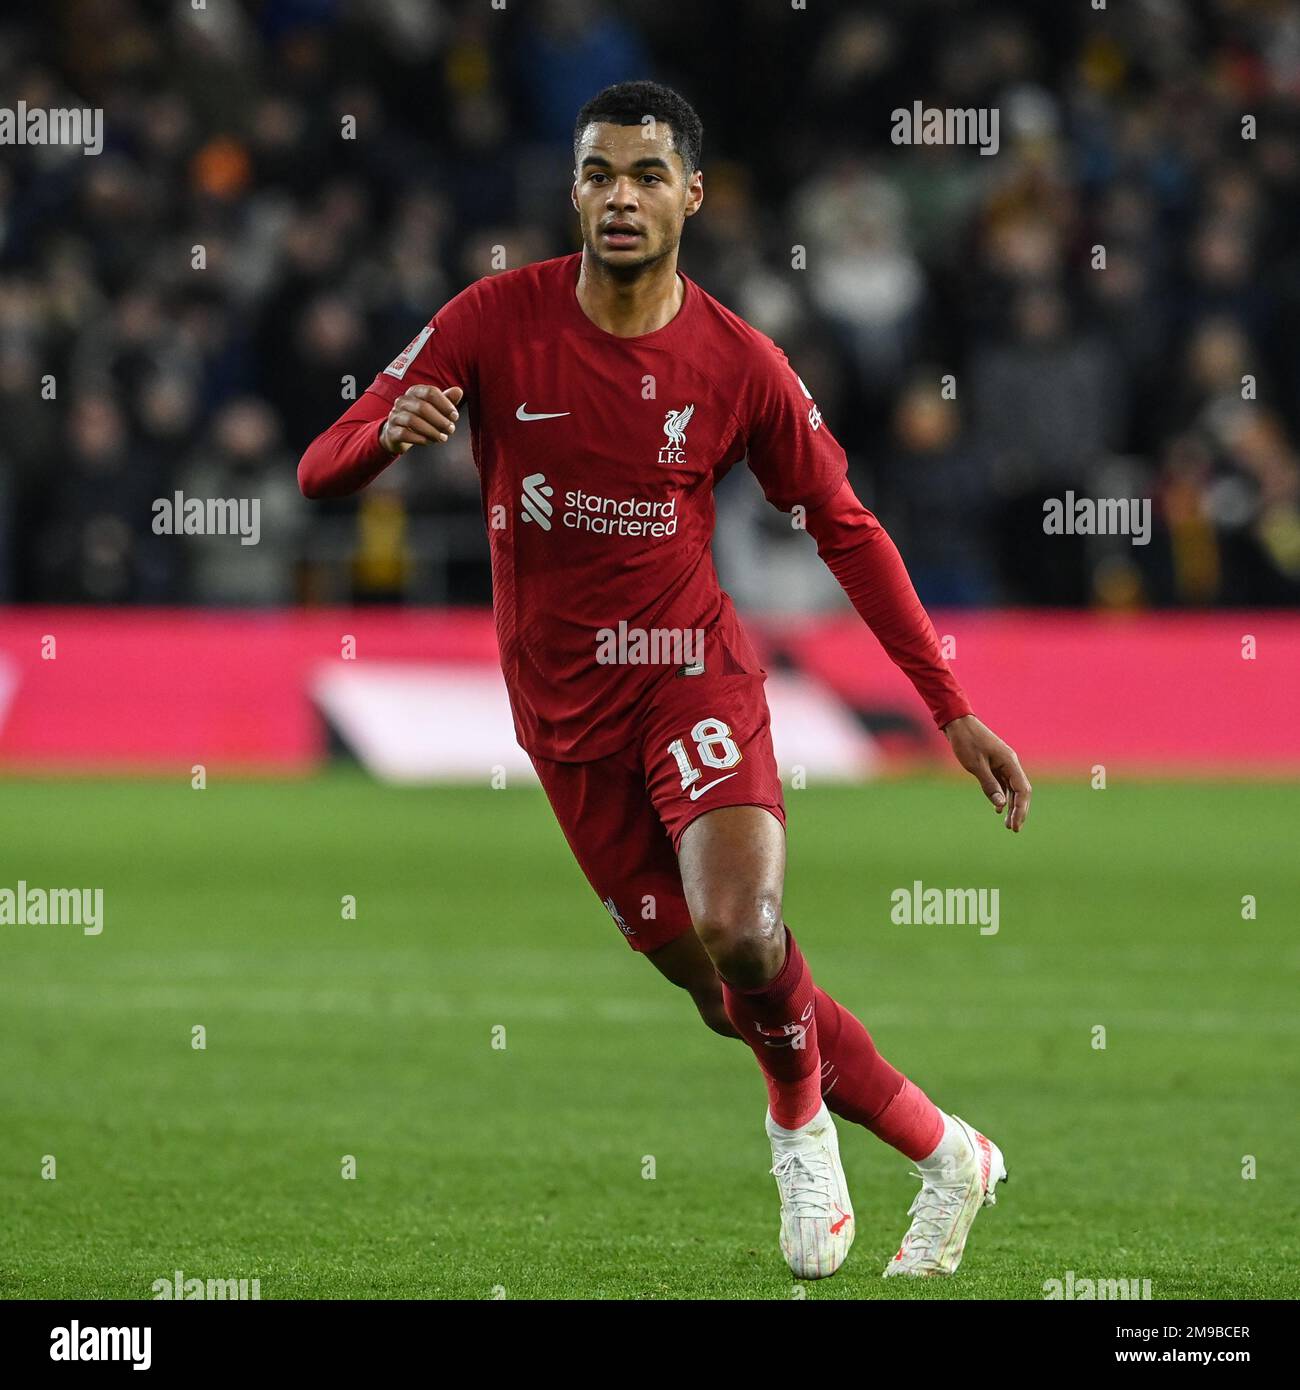 Cody Gakpo #18 of Liverpool during the Emirates FA Cup Third Round Replay match Wolverhampton Wanderers vs Liverpool at Molineux, Wolverhampton, United Kingdom, 17th January 2023  (Photo by Craig Thomas/News Images) Stock Photo